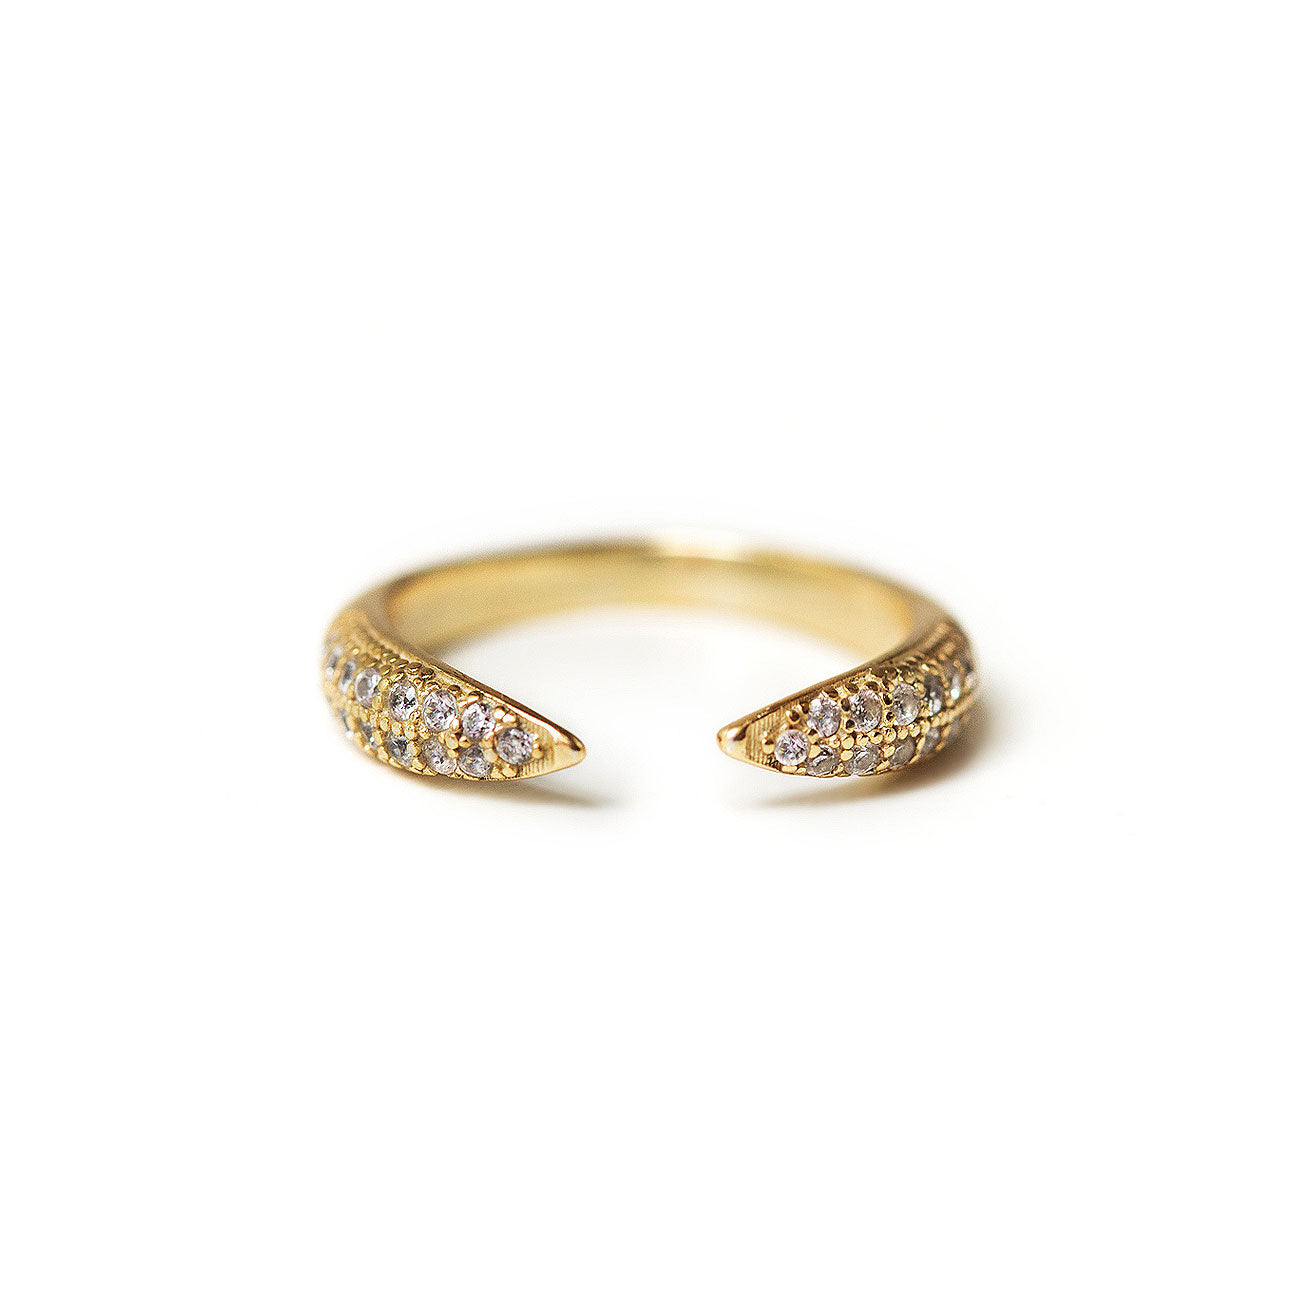 Diamond Claw Ring 14K White Gold / 8 by Baby Gold - Shop Custom Gold Jewelry